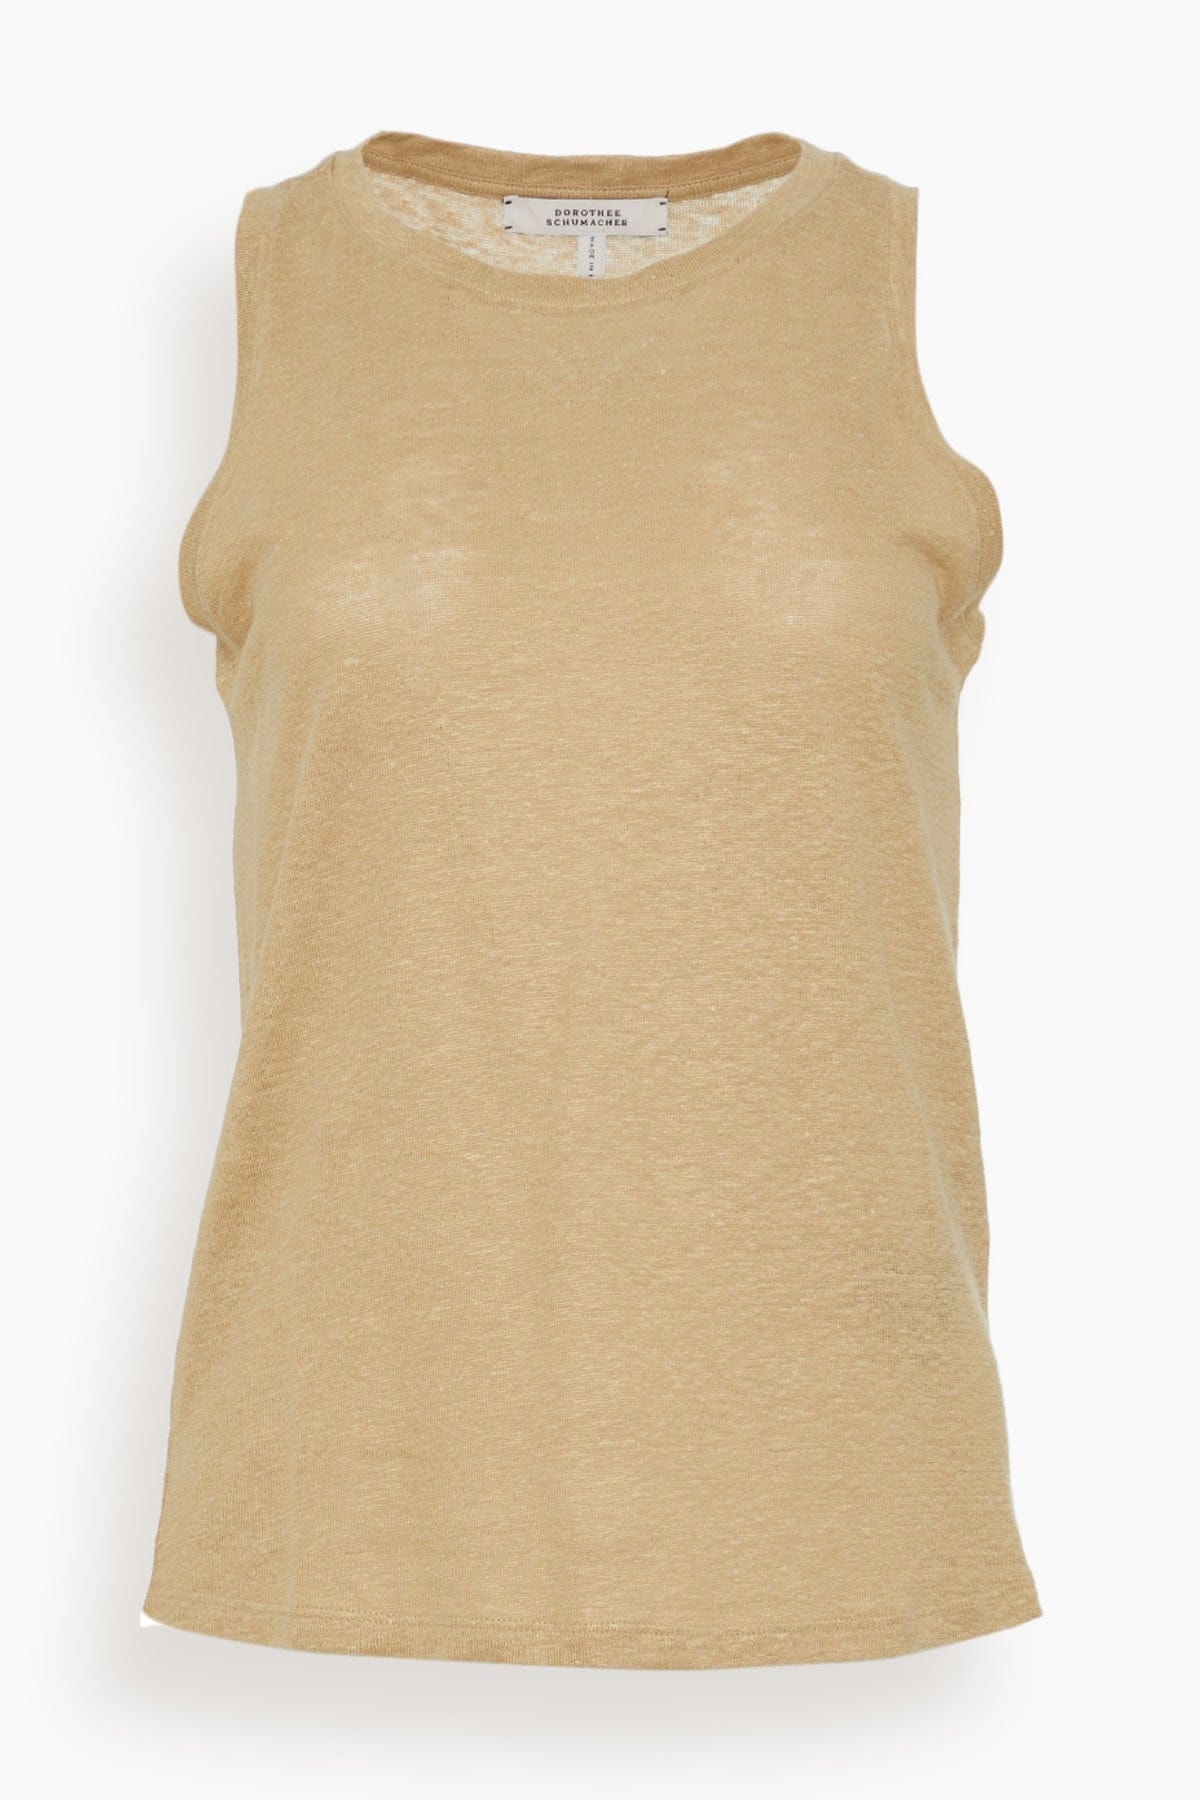 Natural Ease Sleeveless Top in Shimmering Gold - 1